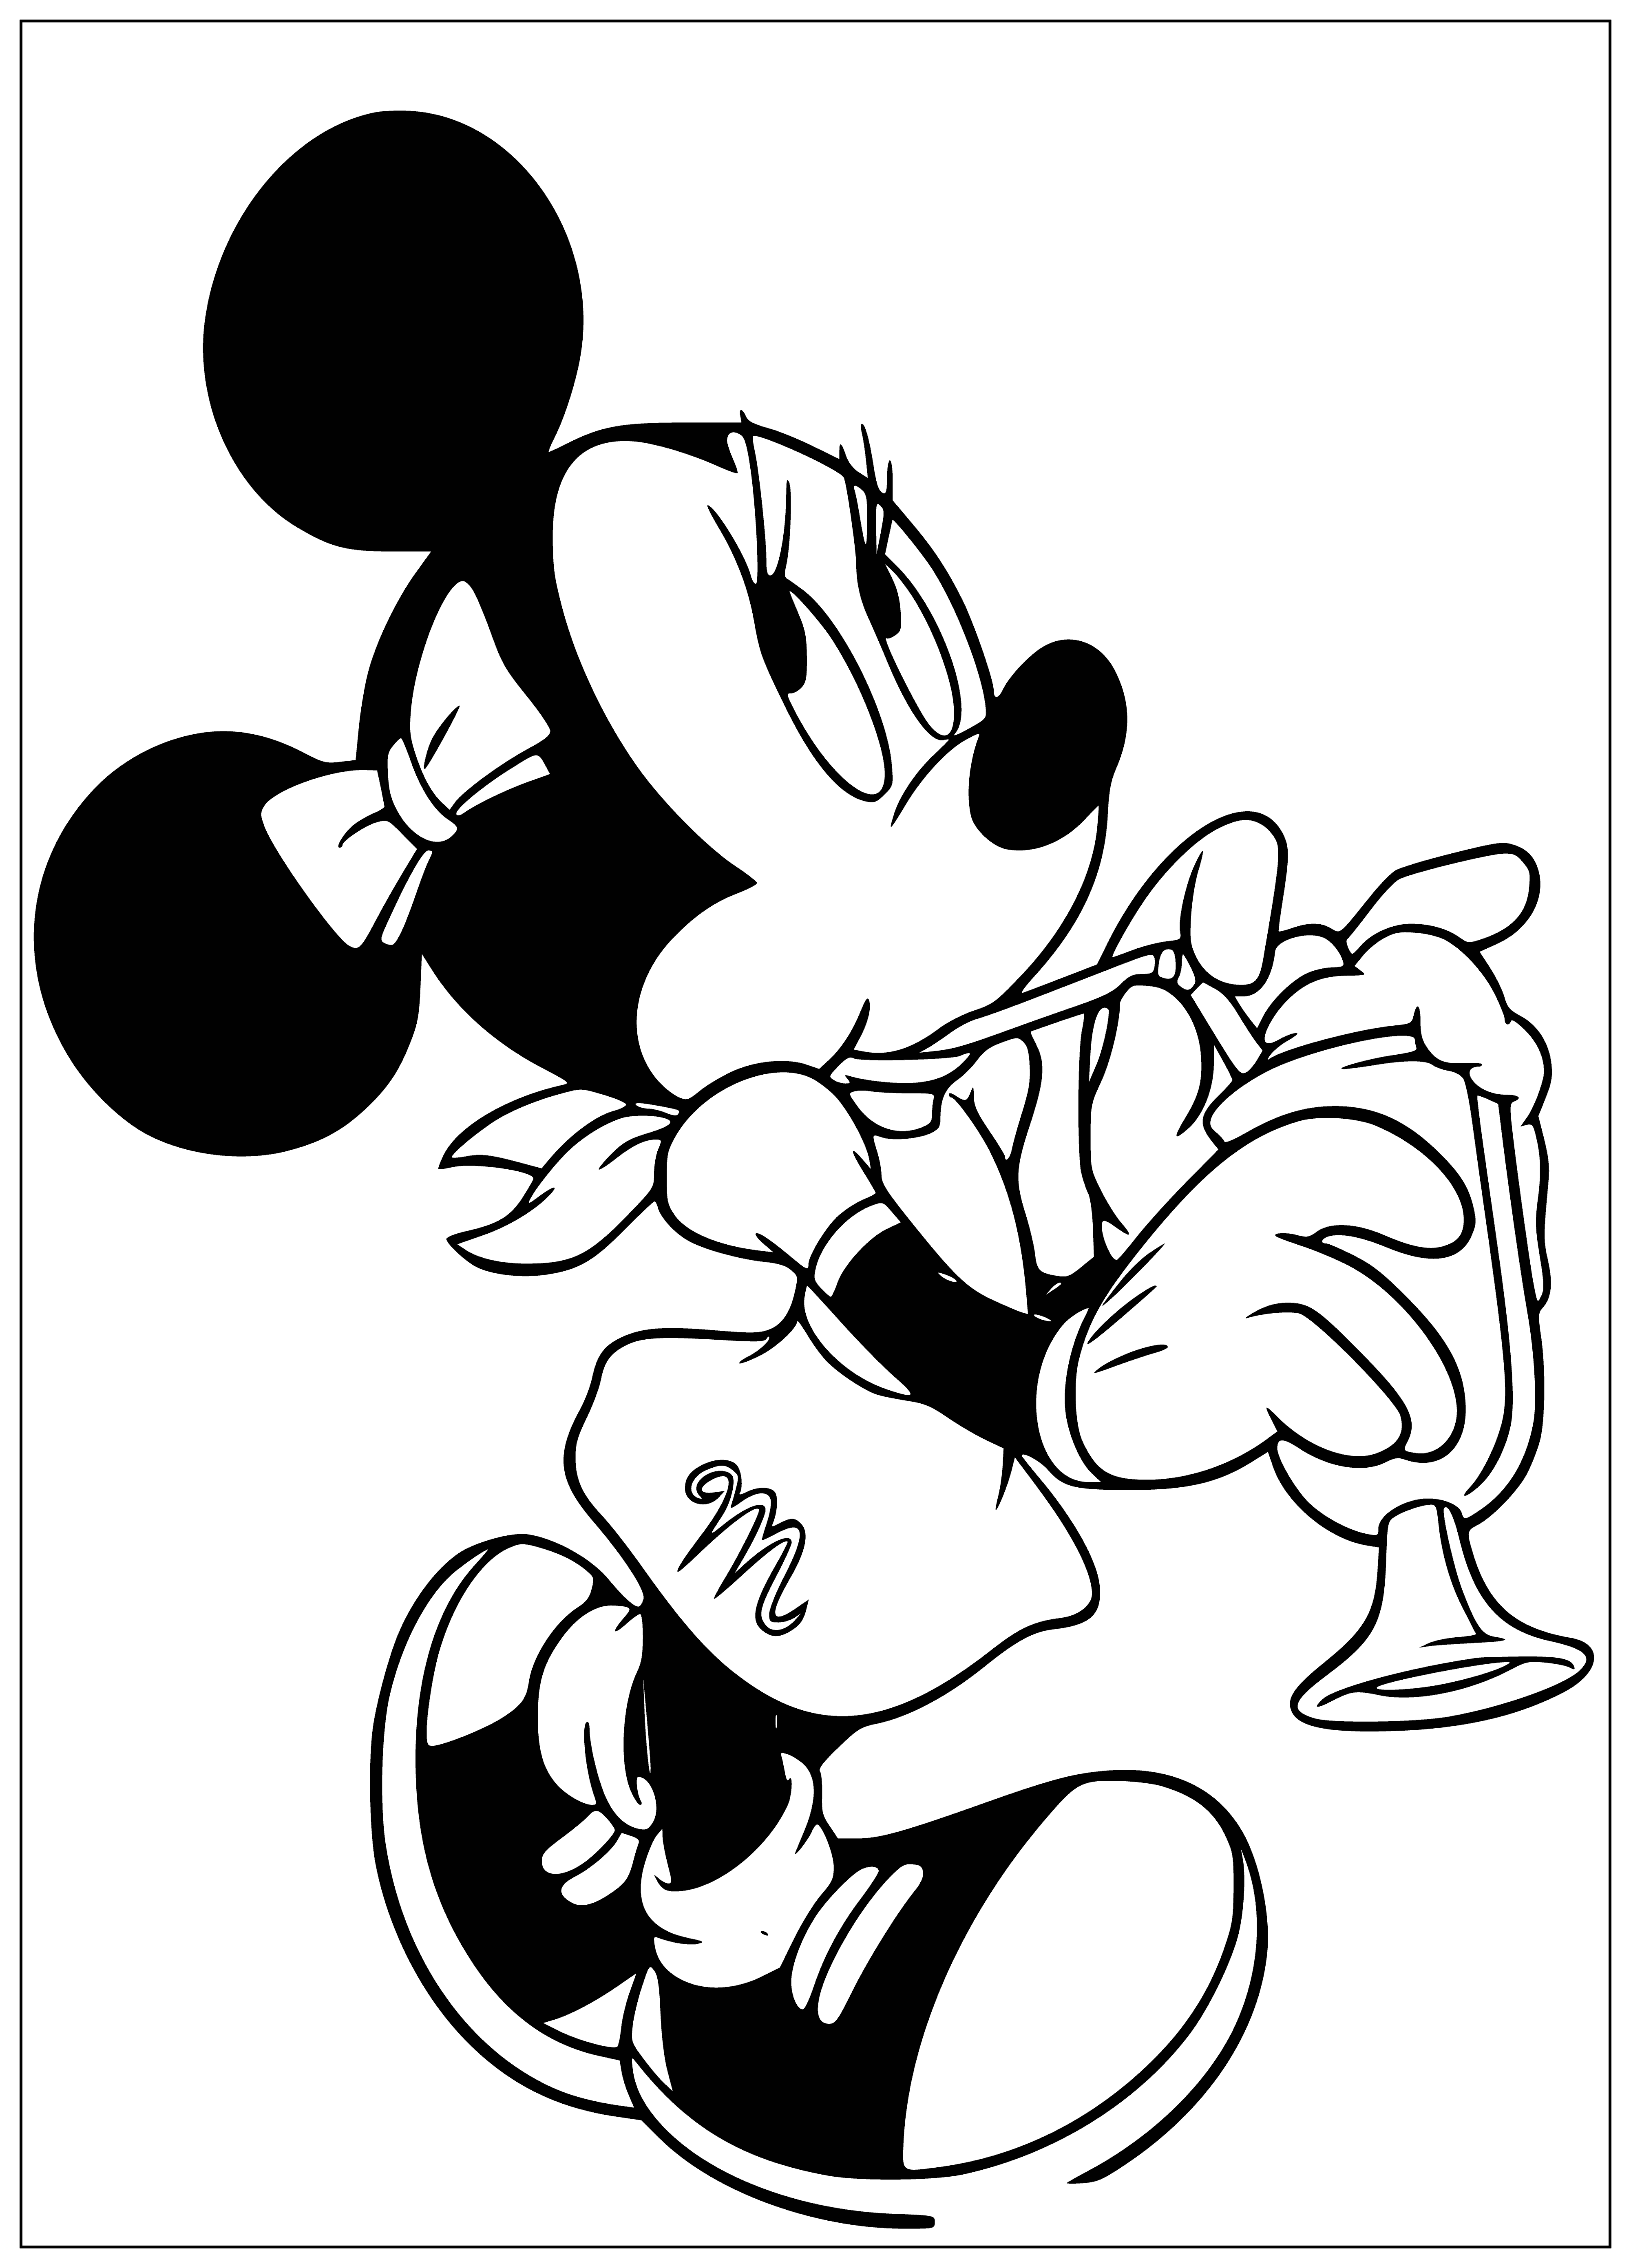 coloring page: Four glasses of colorful cocktails, with three Mickey-themed & one Minnie-themed. Green, red, yellow, & pink drinks in each.